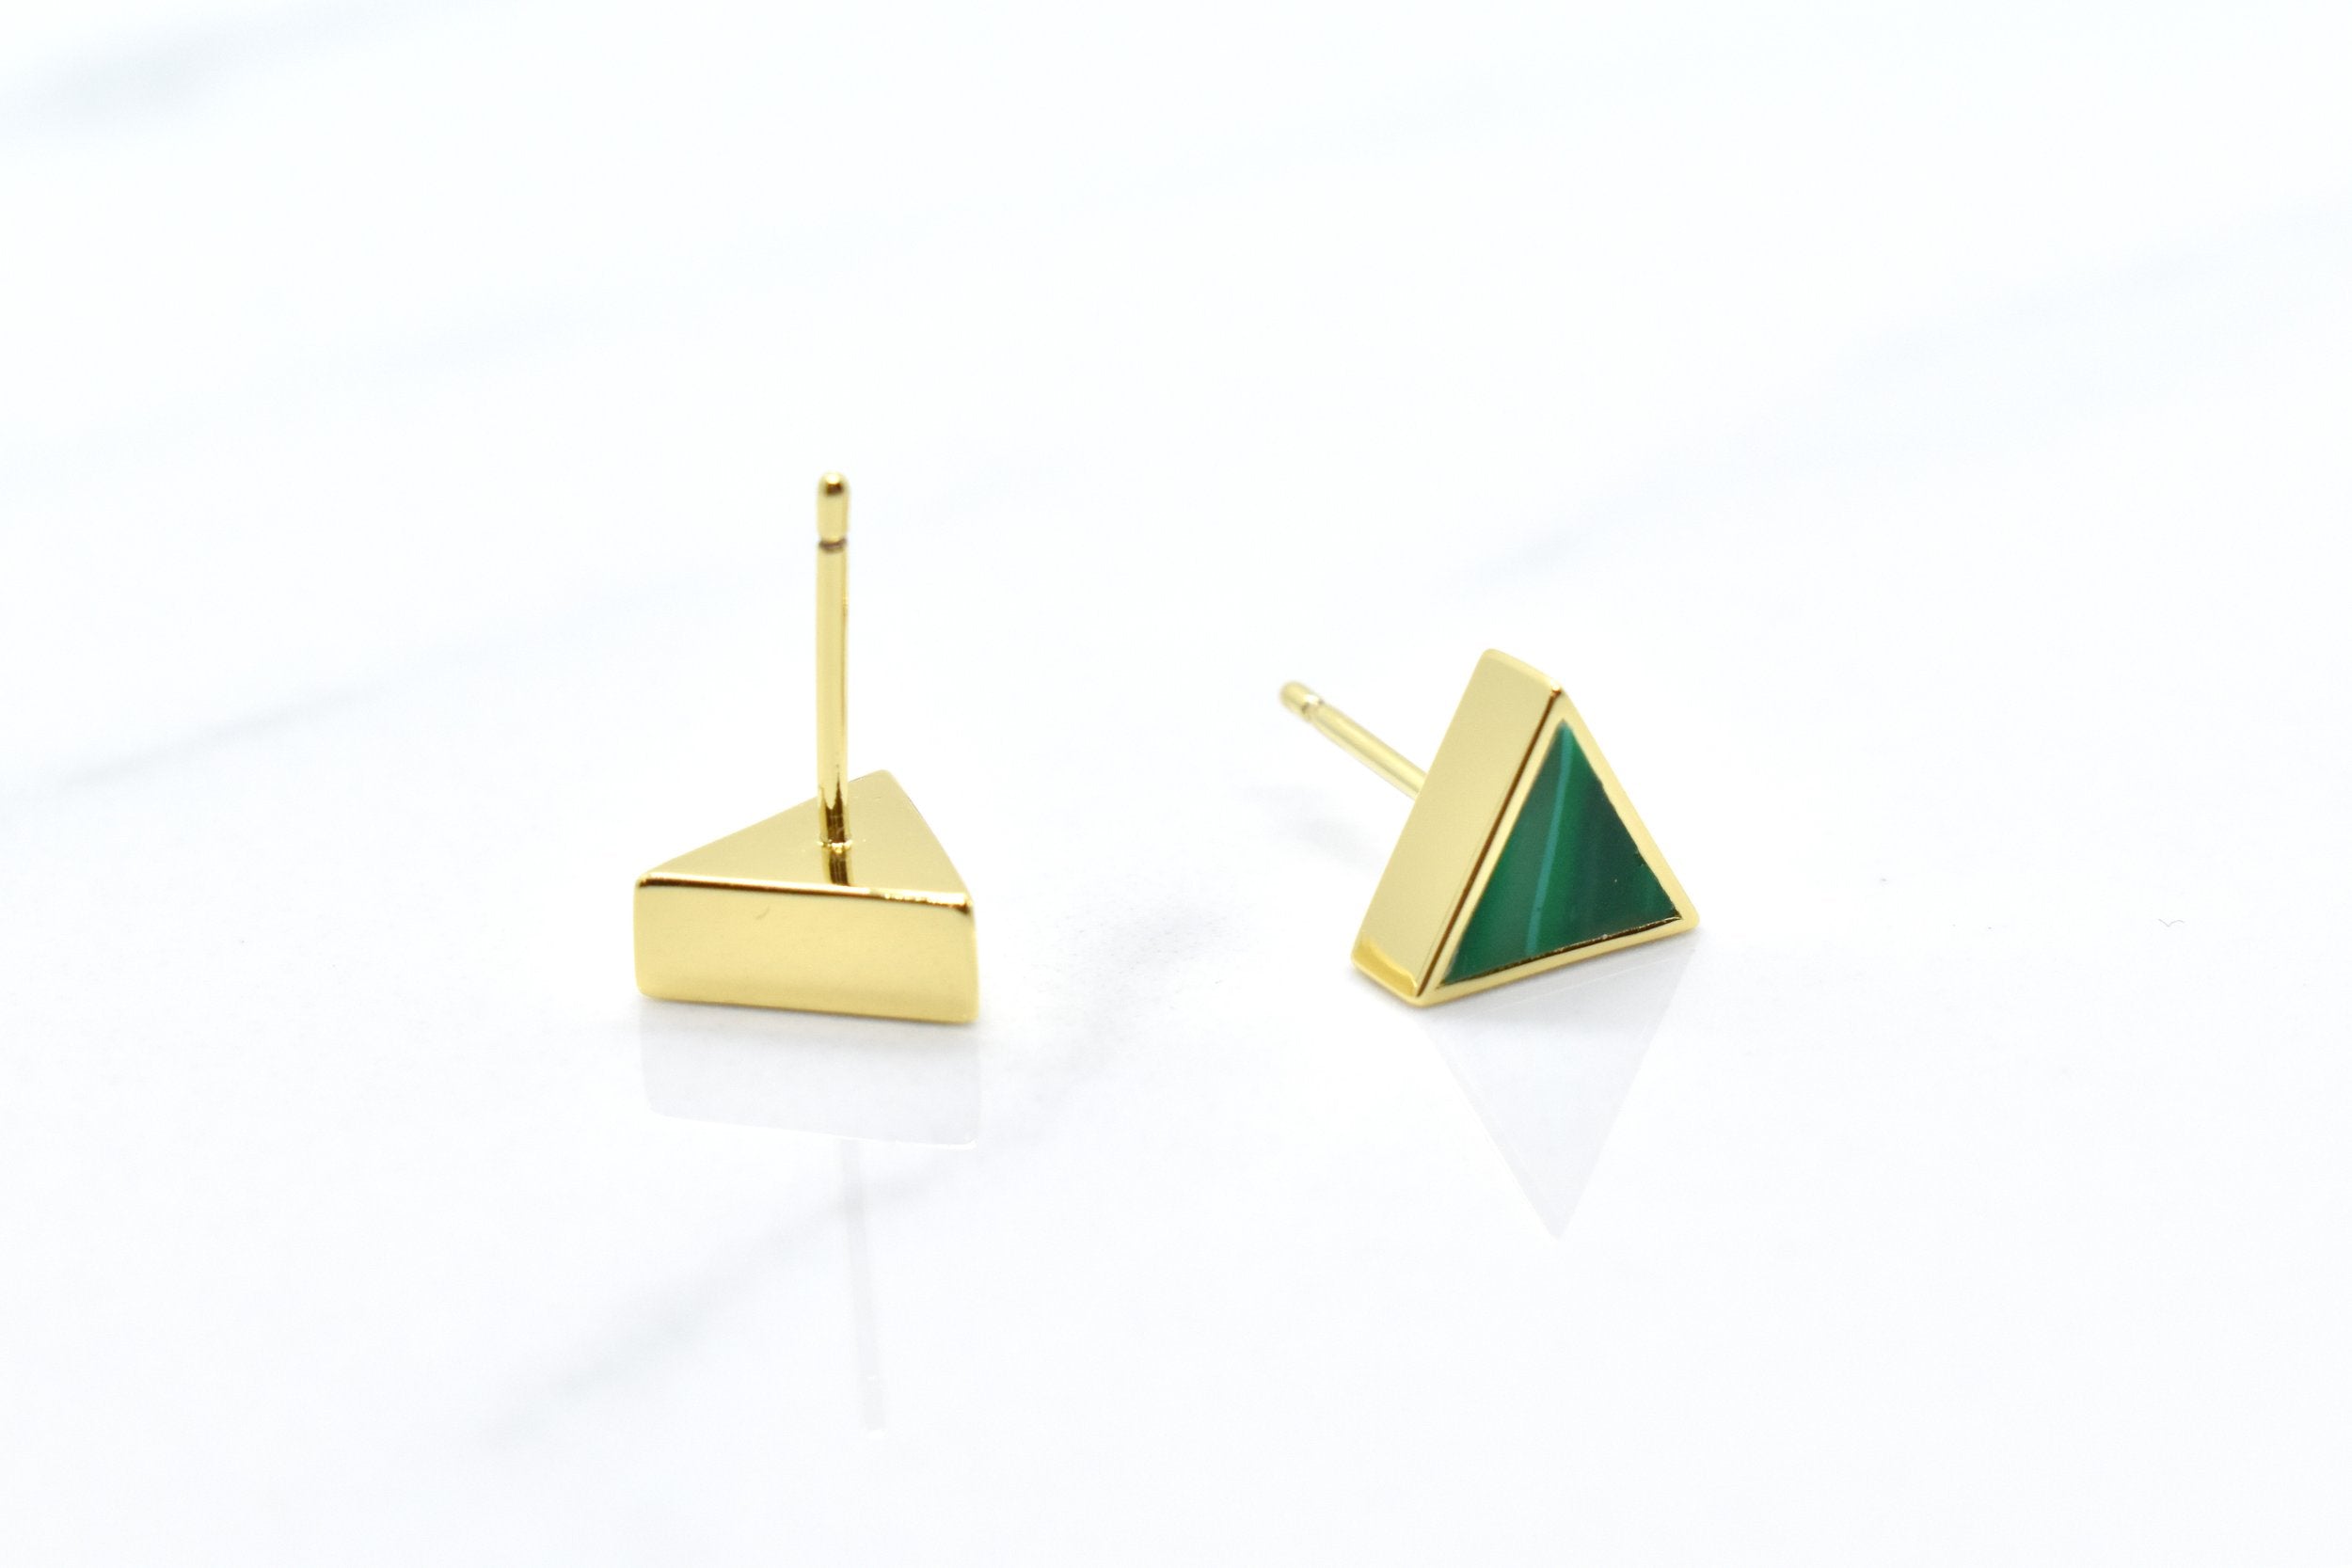 geometric triangle stud earrings in jade green showing the backside where you can see the surgical steel posts that are hypoallergenic and good for sensitive ears